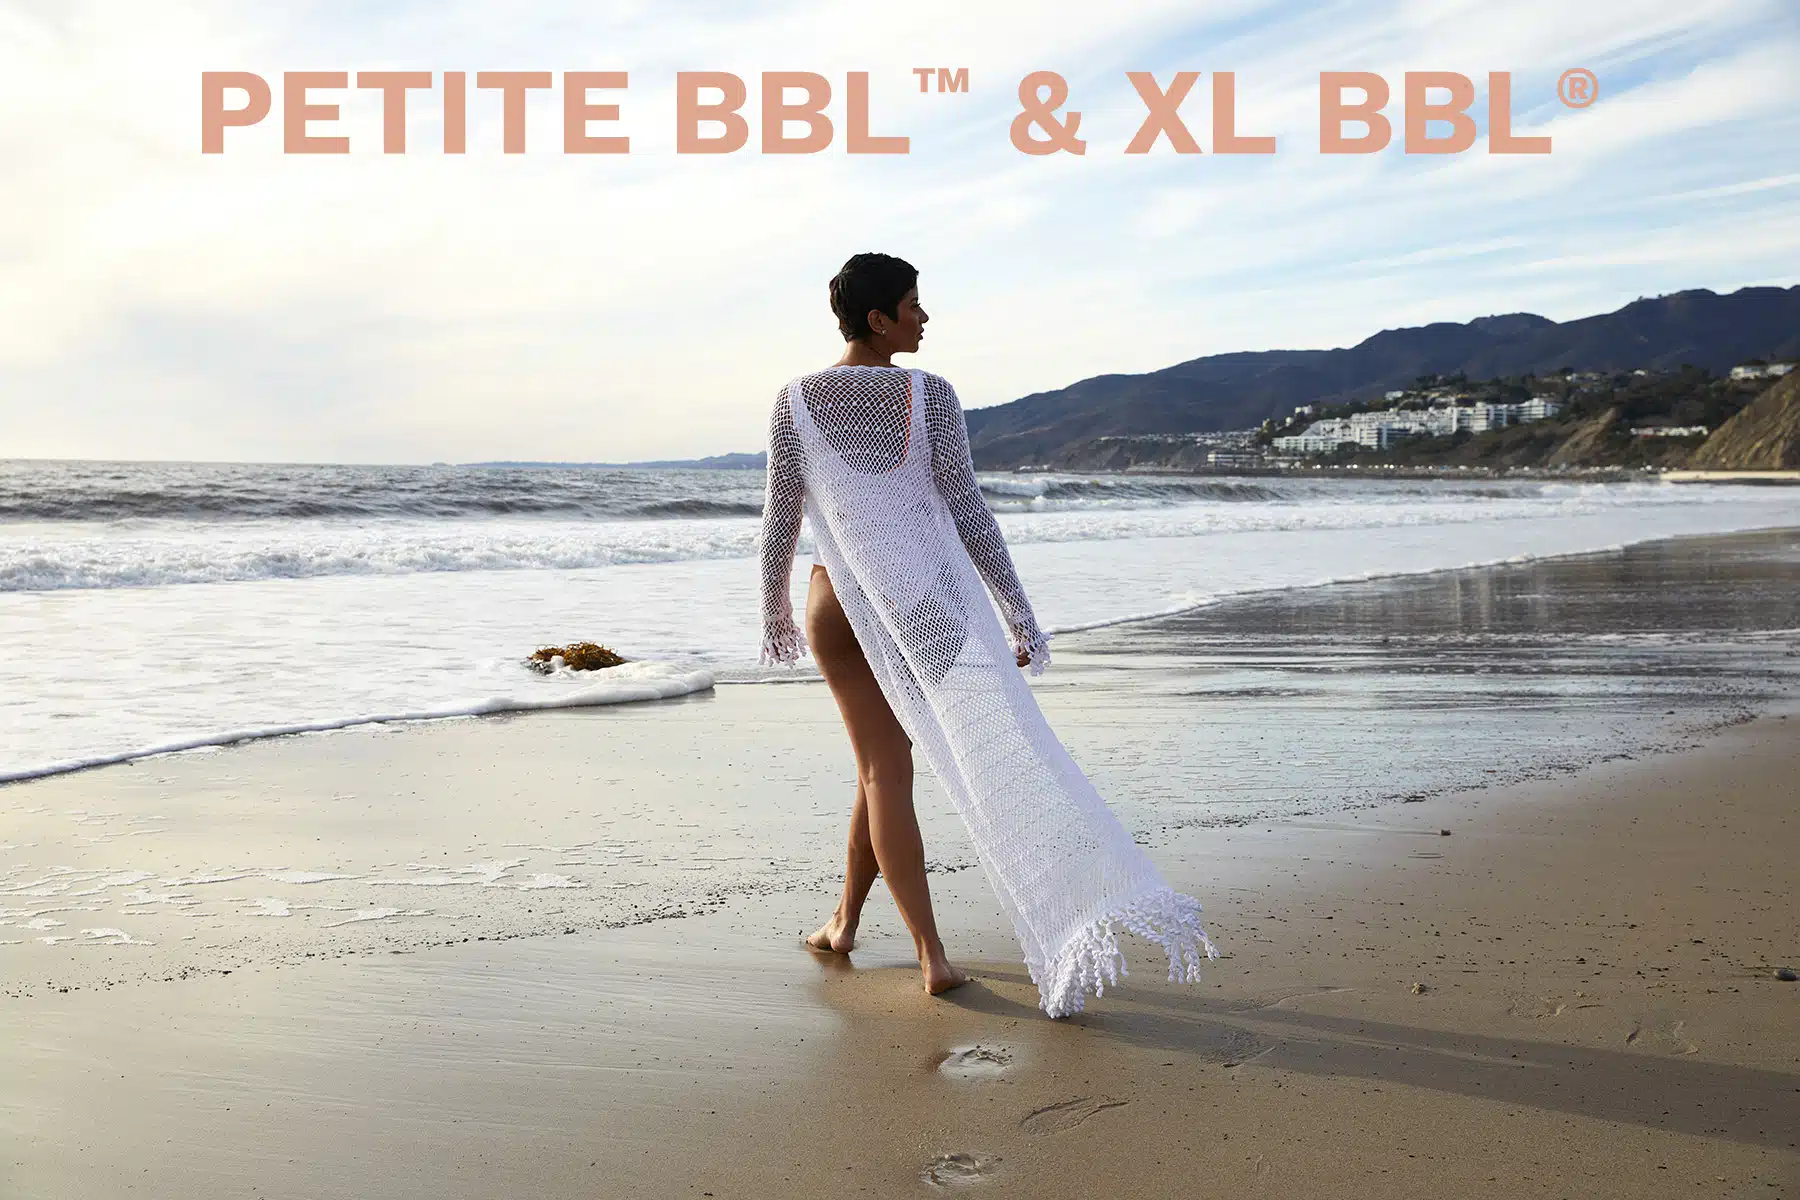 Petite BBL and XL BBL services